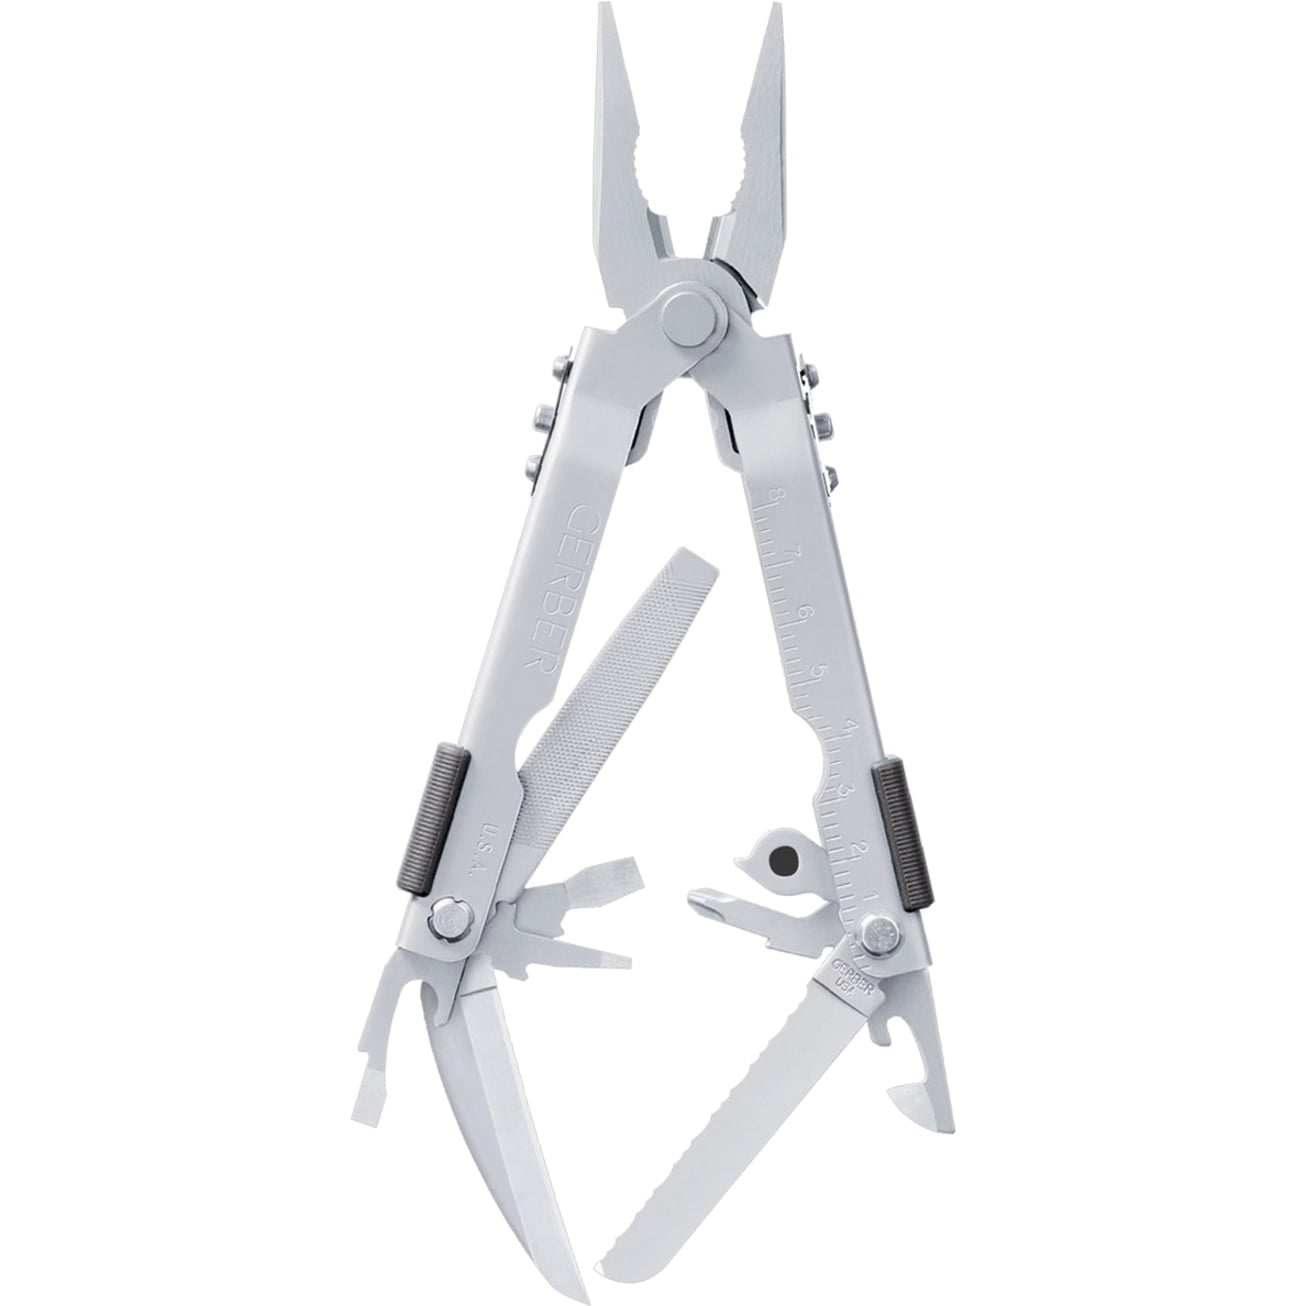 Details about   Gerber MP600 multitool multi tool no packaging 